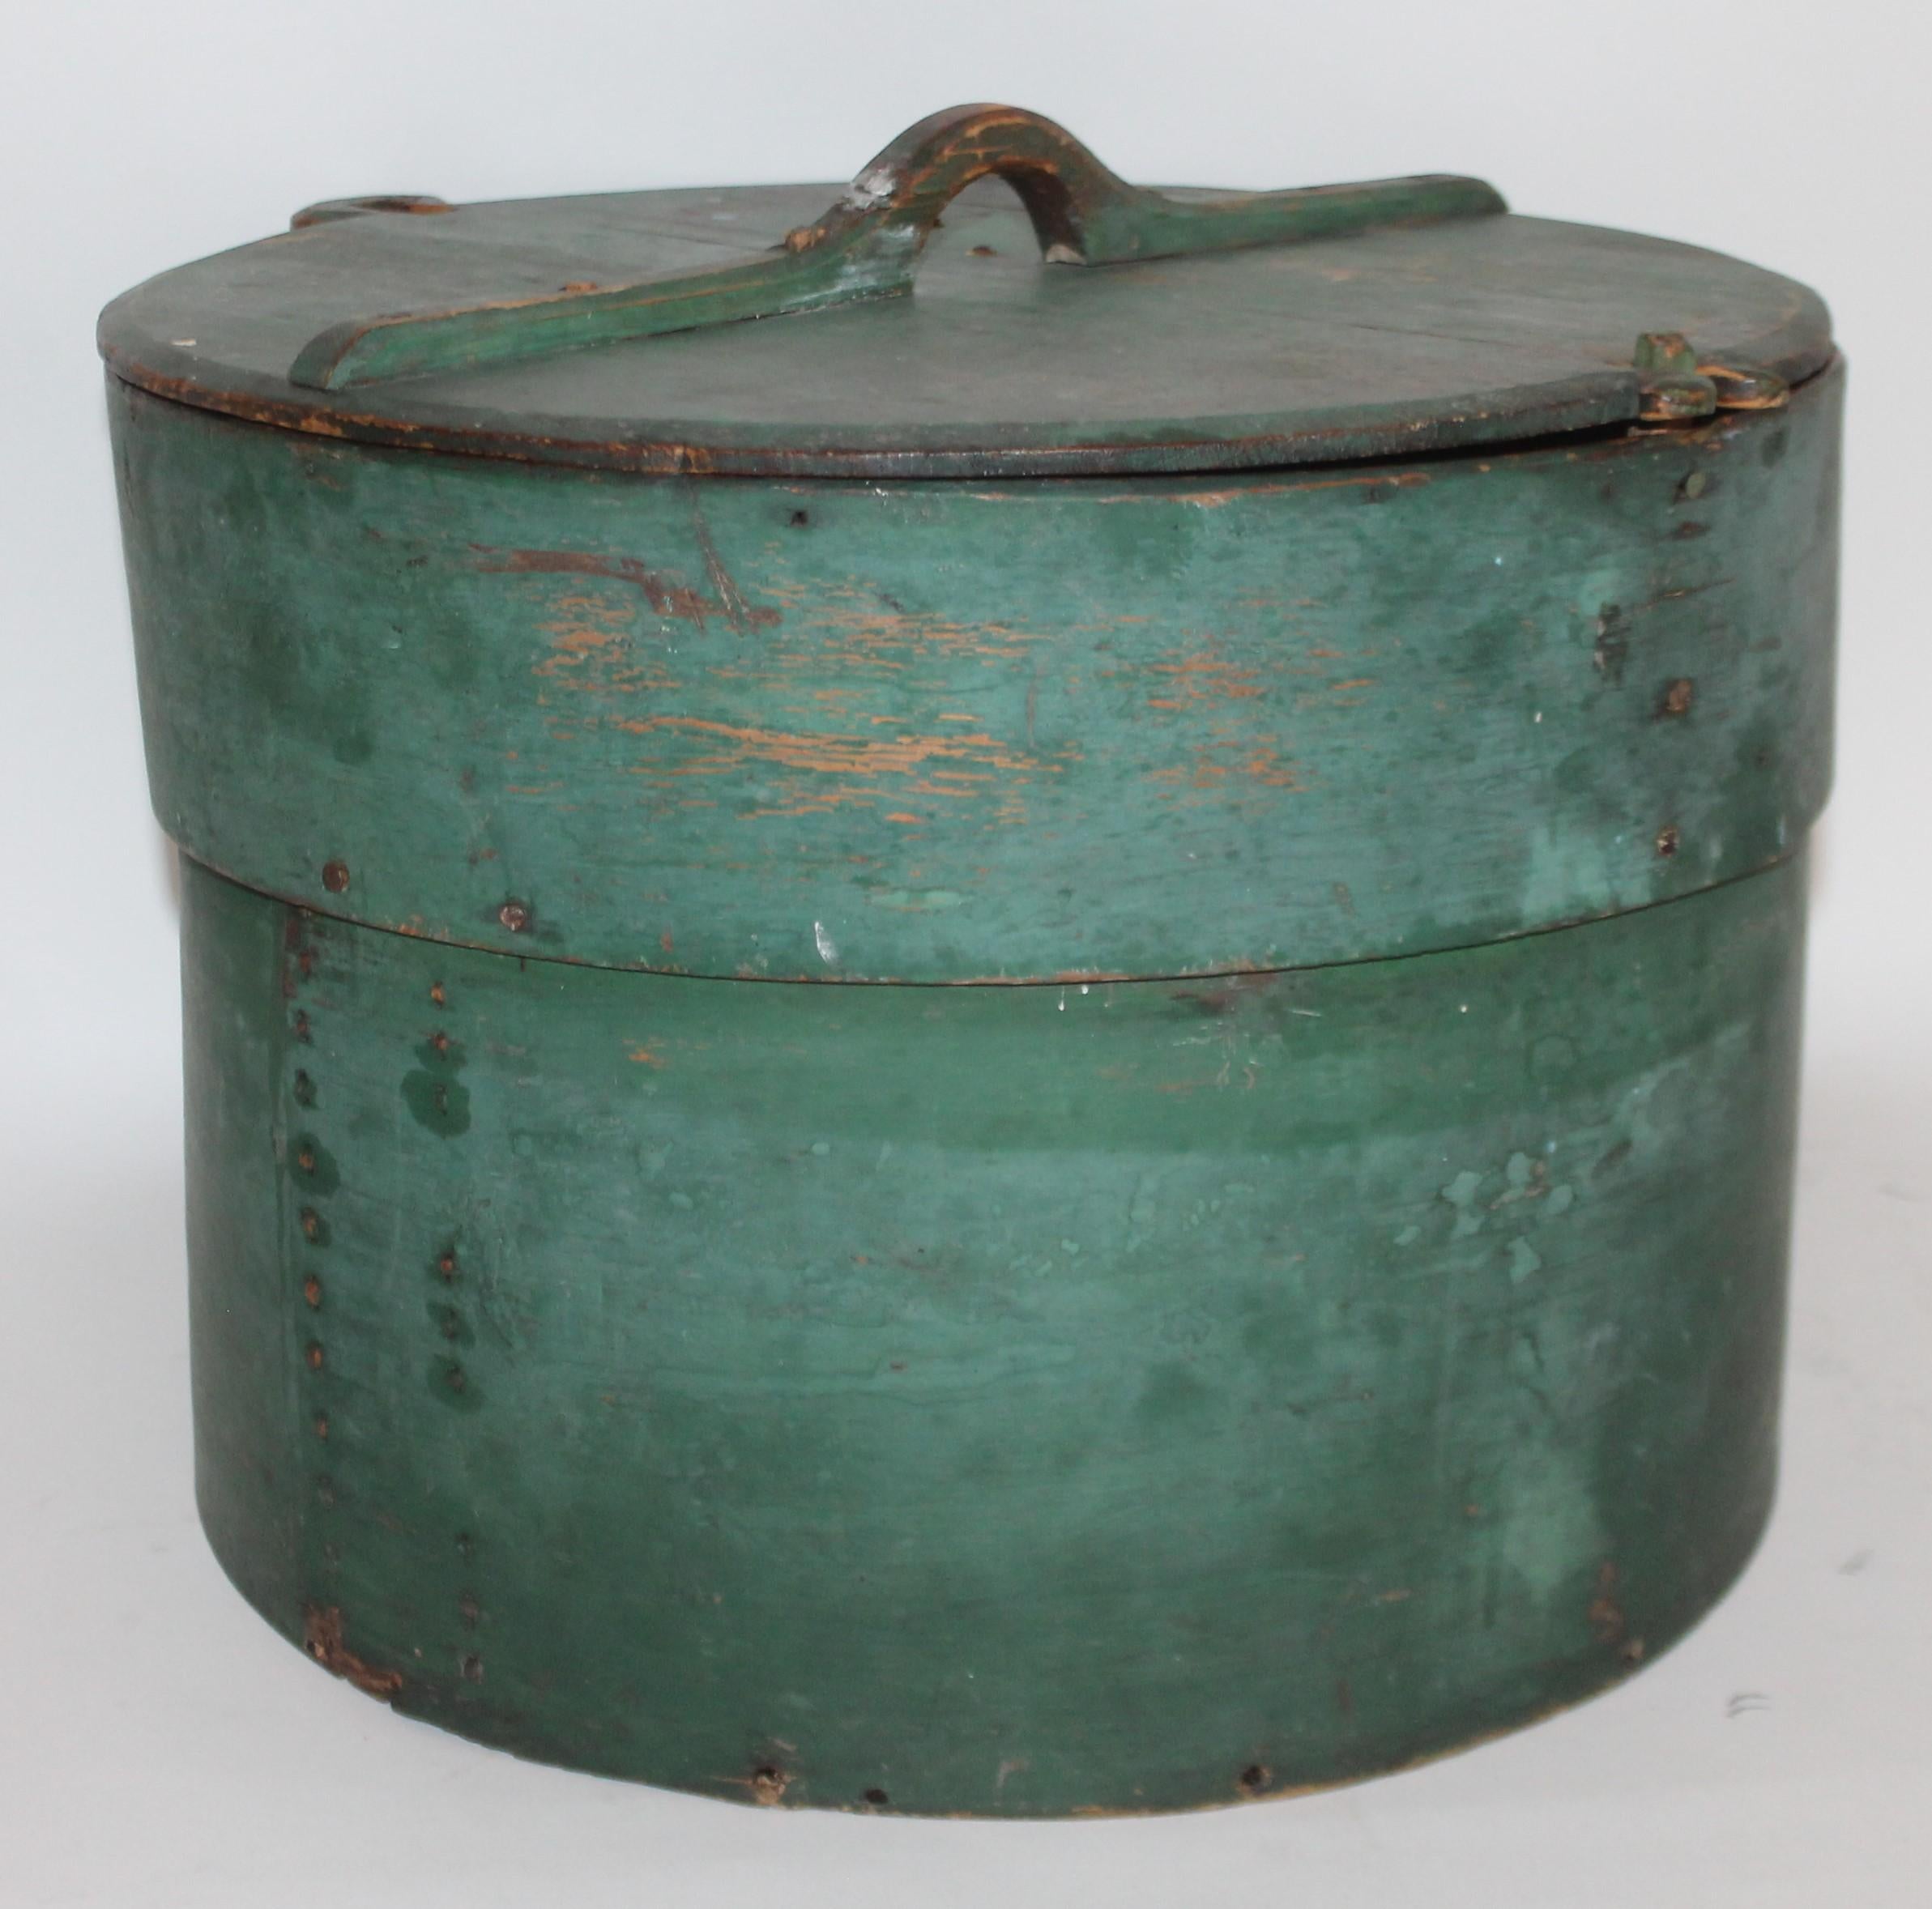 This large size pantry box or meal box is in original fantastic green paint. It is in the form of a large band box and hand carved handle and early wood peg construction.